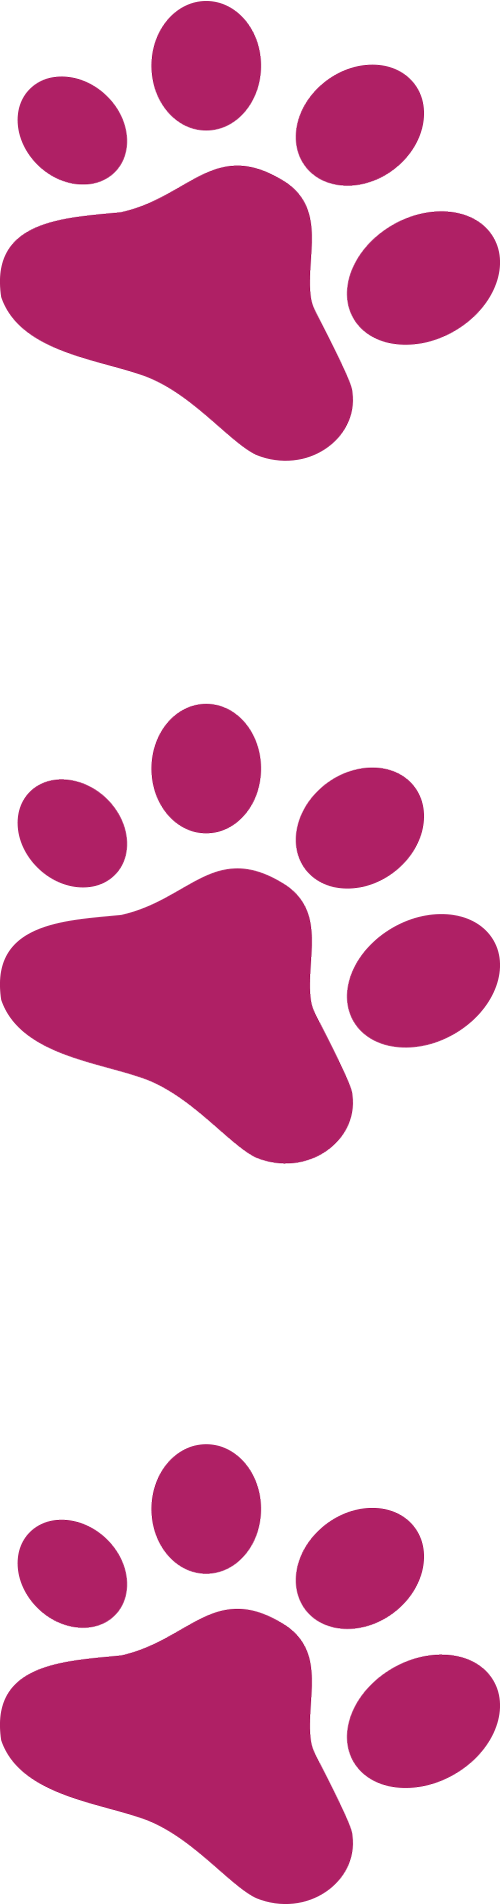 clipart of paw prints